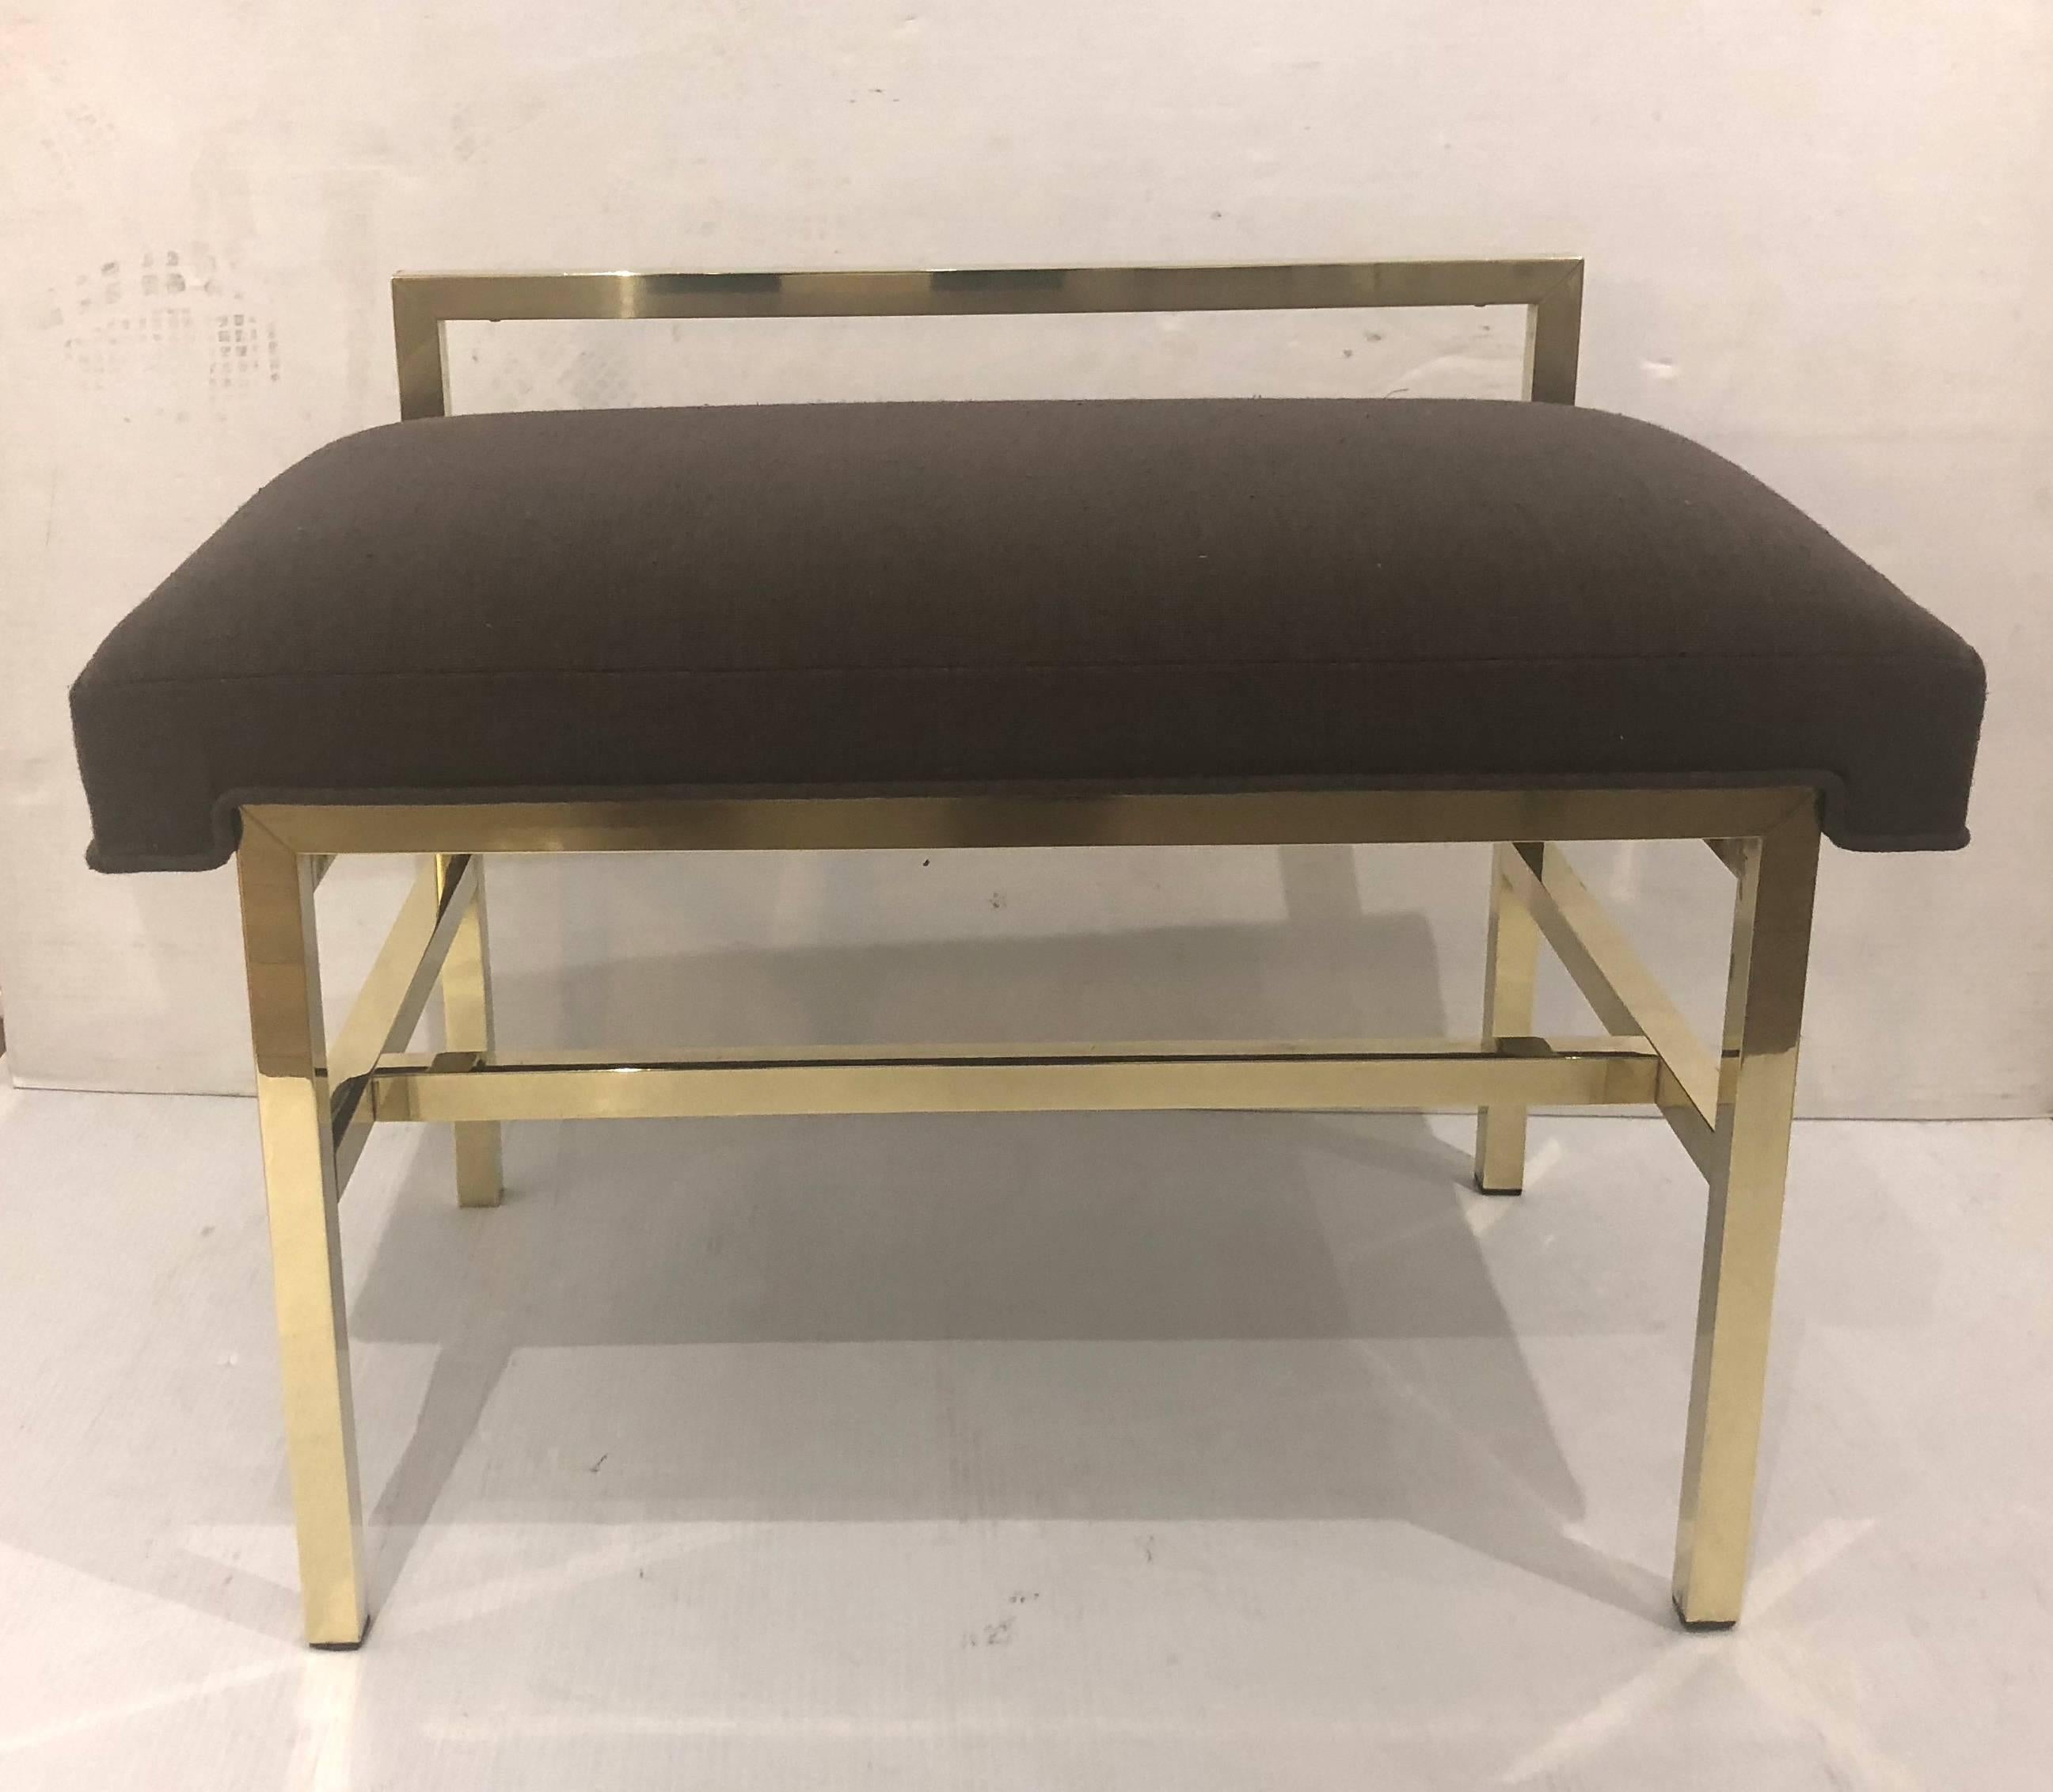 Elegant and rare bench in the style of Dunbar freshly polished brass pipping frame, and new upholstered seat in Knoll fabric, solid and sturdy excellent quality.